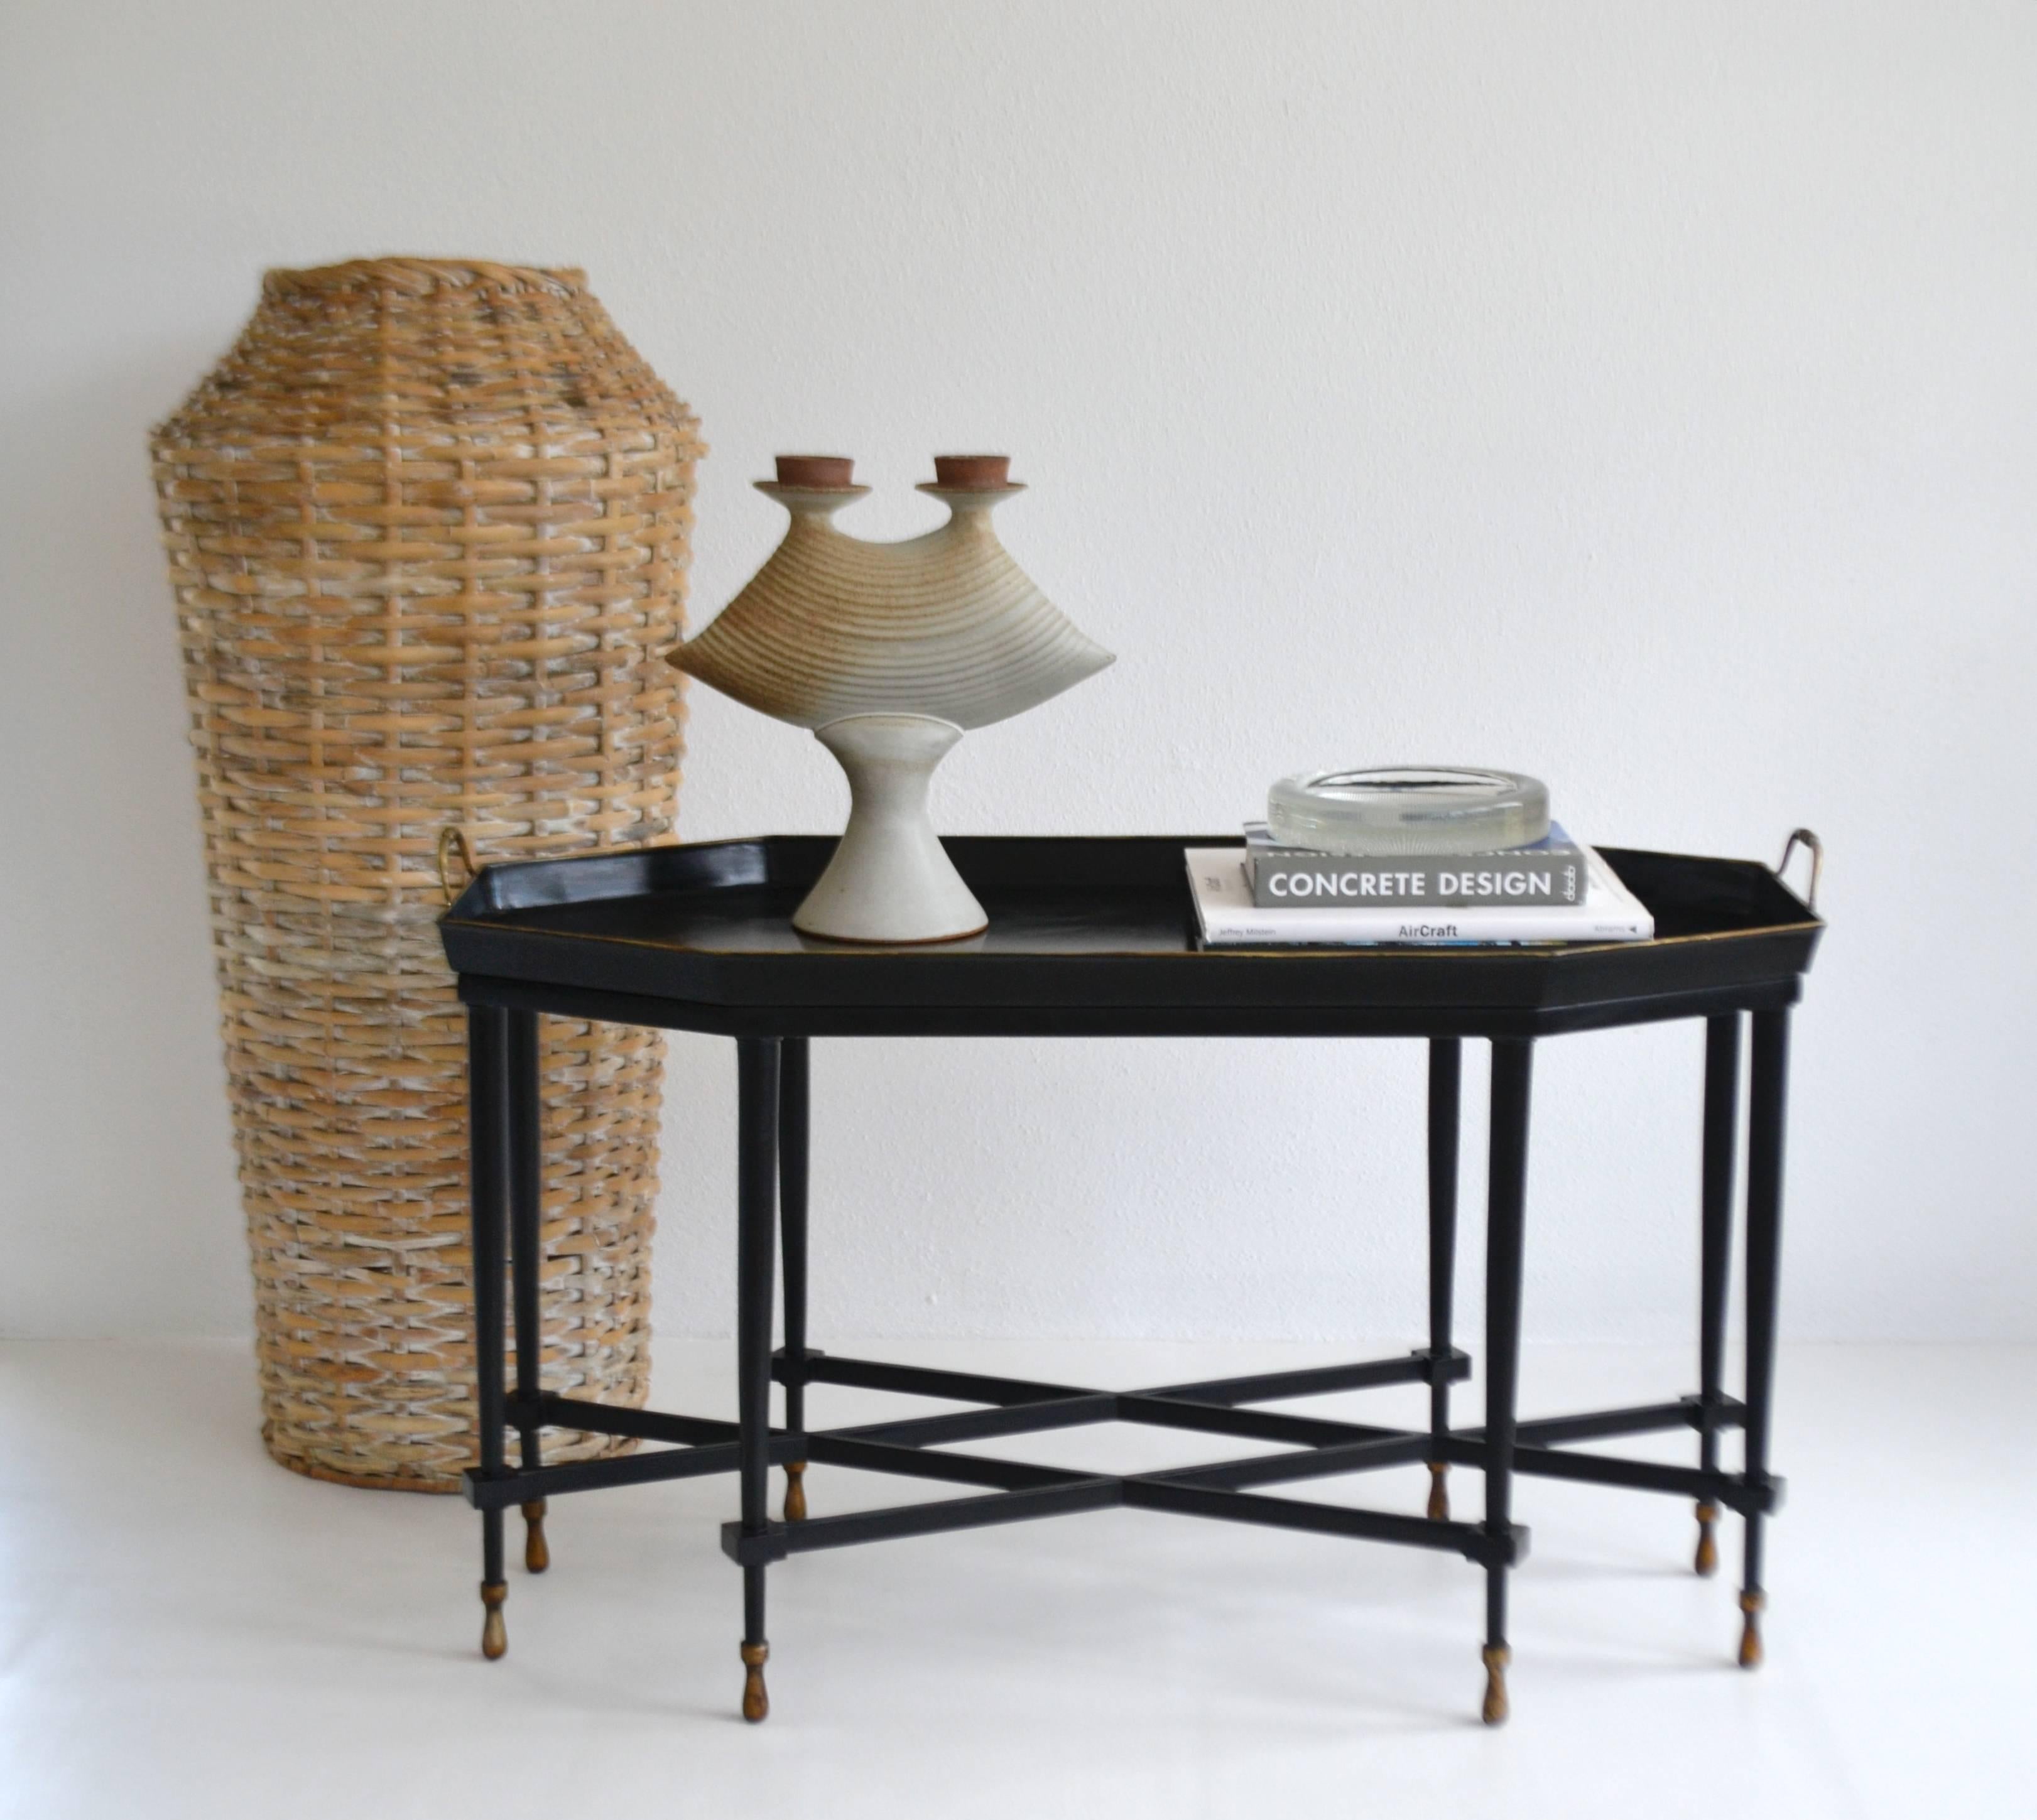 Glamorous Hollywood Regency style tole tray top cocktail table, circa 1960s-1970s. This striking coffee table is artisan crafted of black lacquered tole with gilt accents. The table is designed with a removable octagonal tray top mounted on an eight